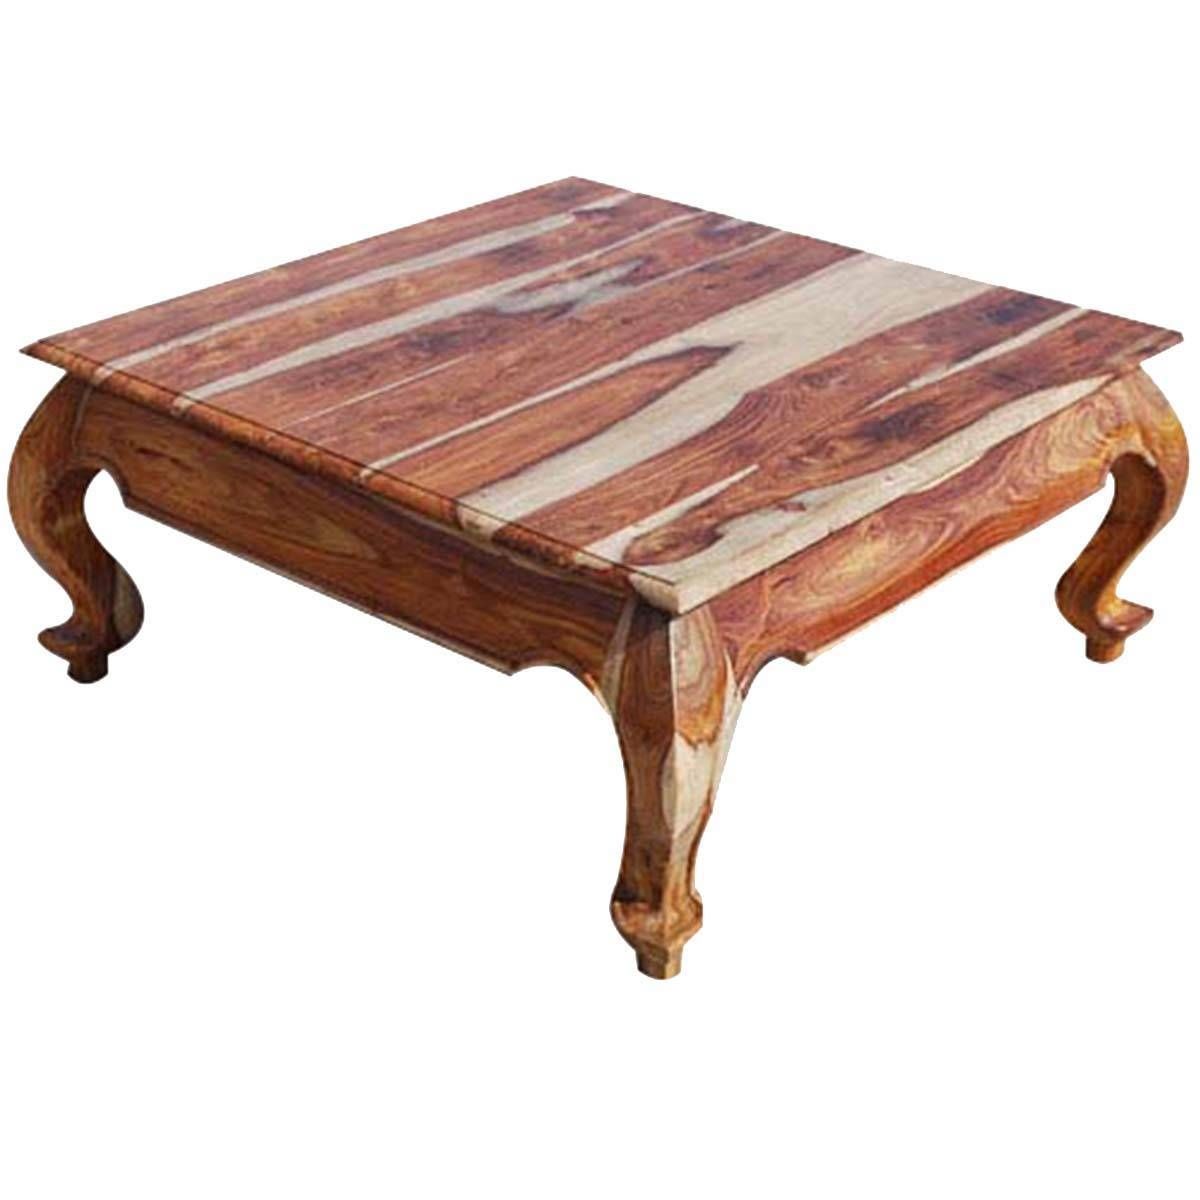 Rustic Coffee Tables Within Solid Wood Coffee Tables (View 3 of 30)